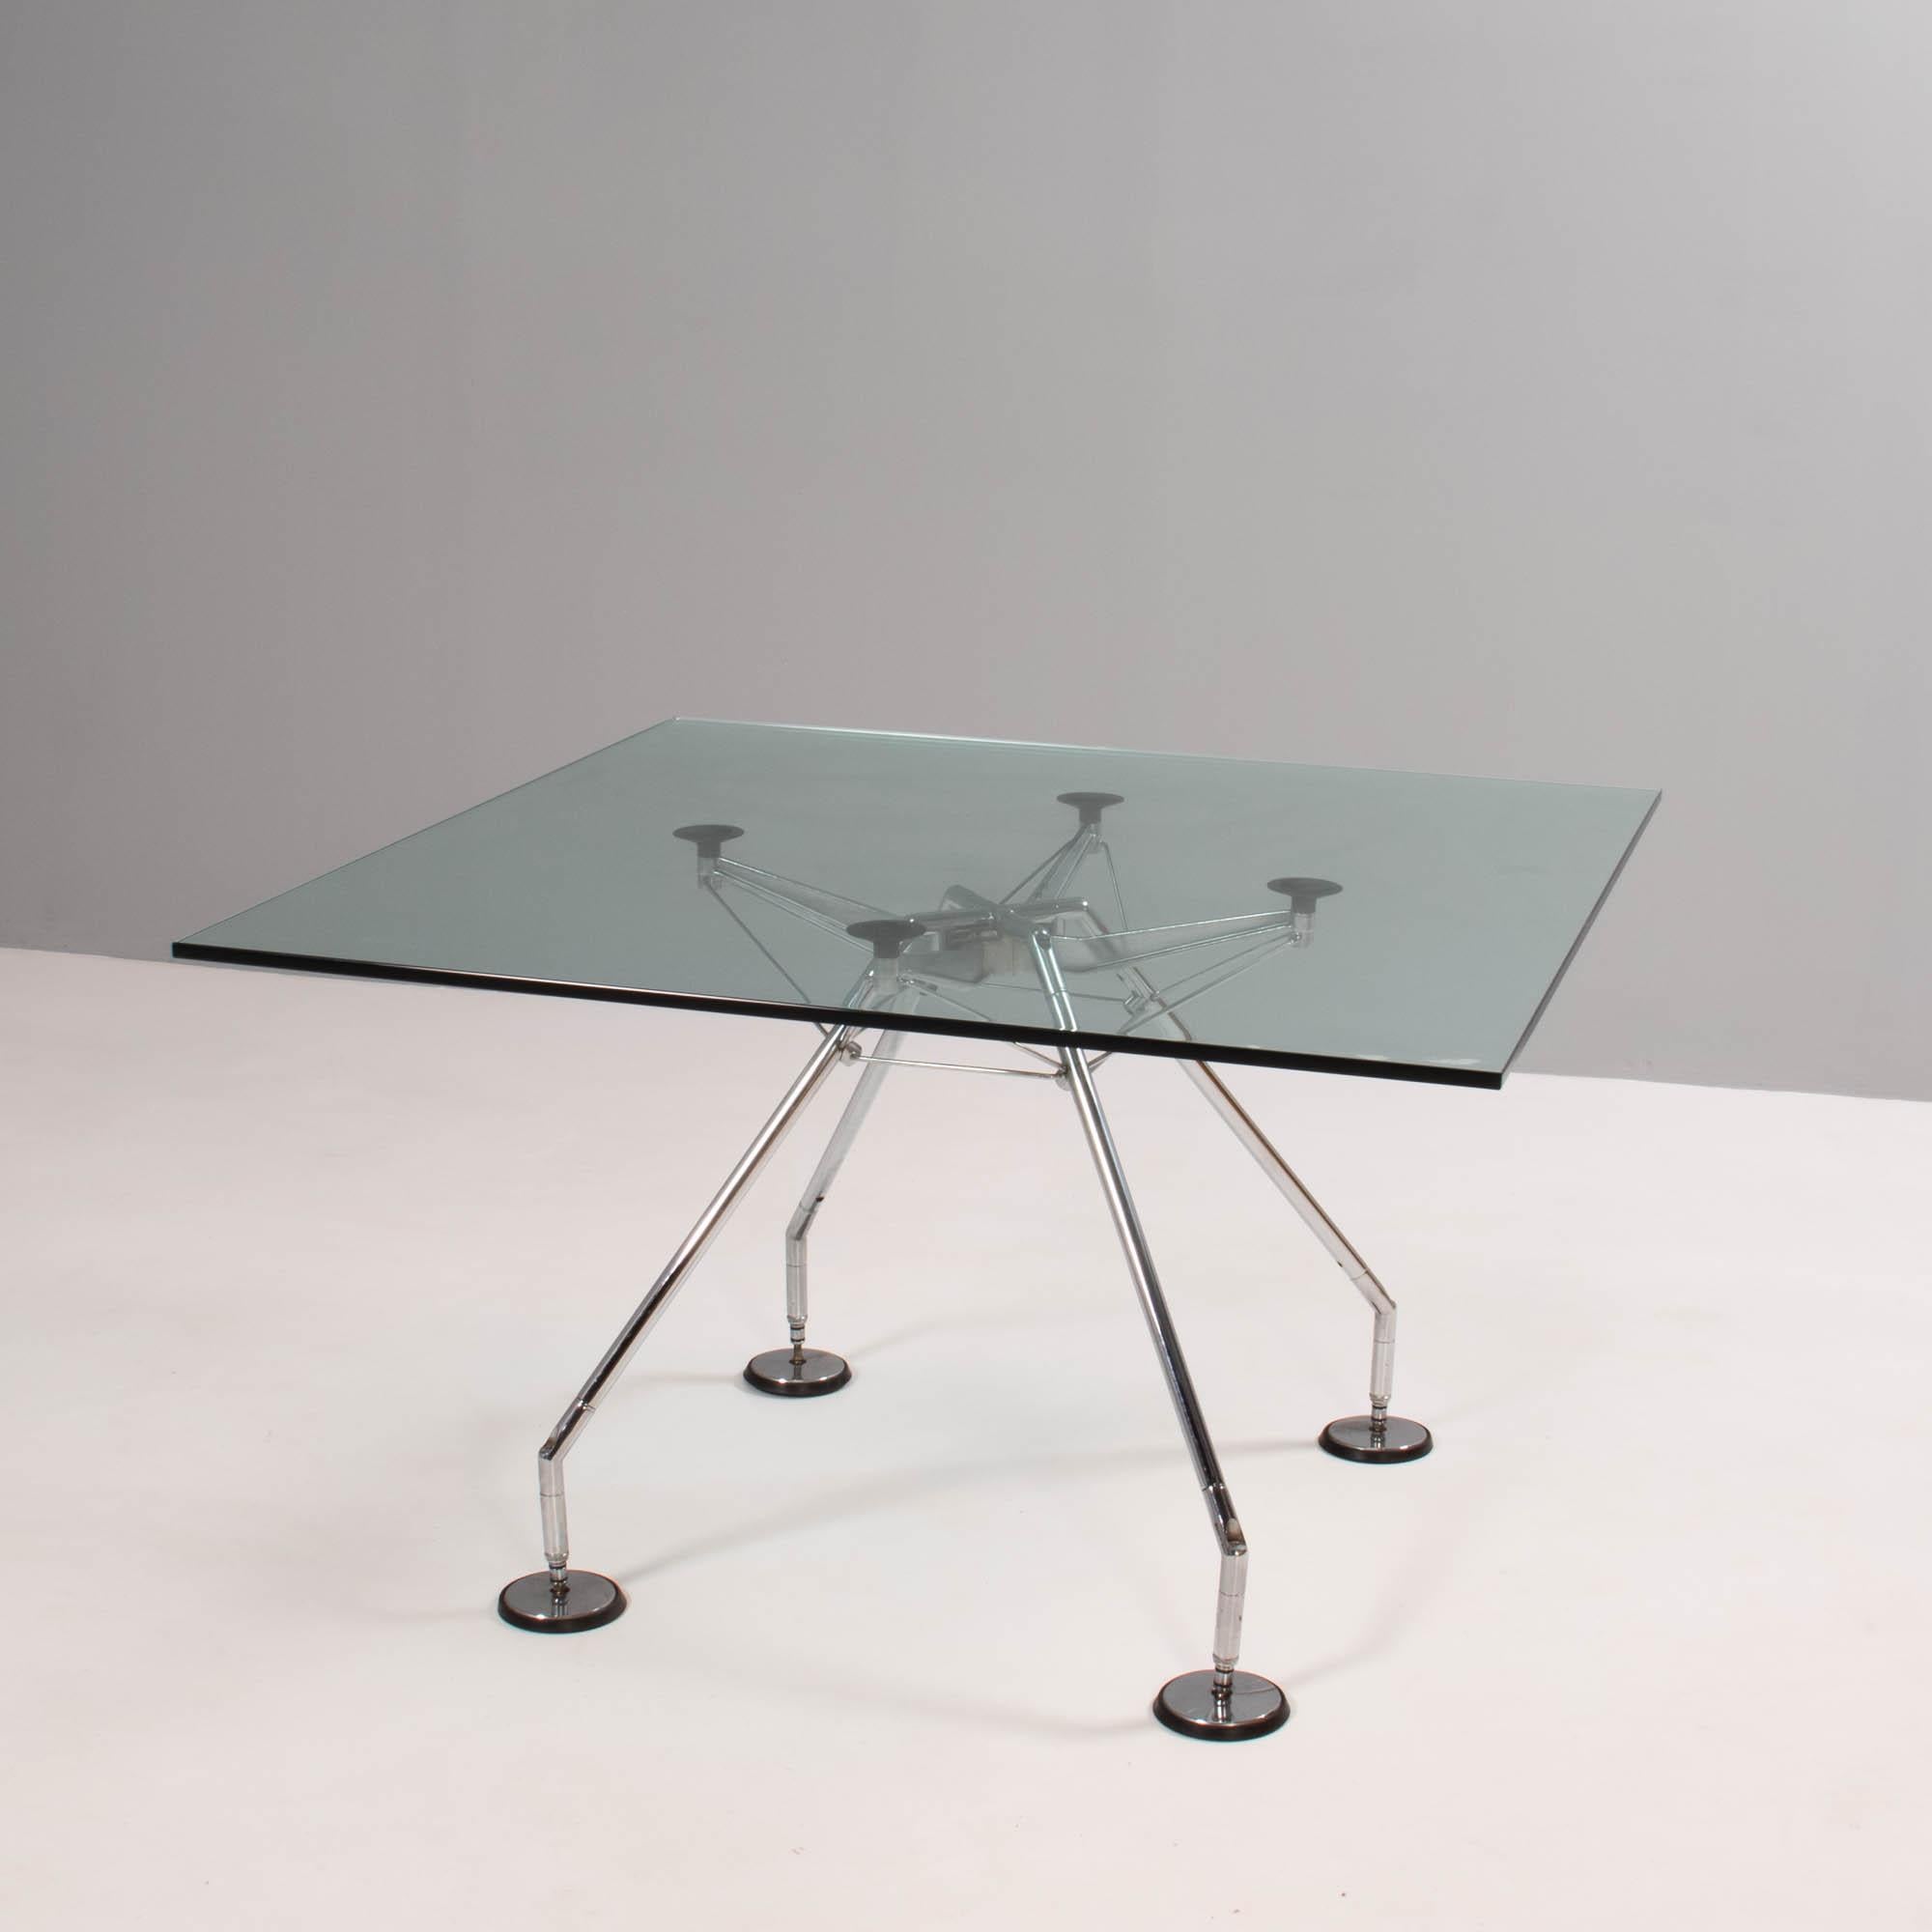 Originally designed by Sir Norman Foster in 1986, the Nomos table has an industrial post-modernist aesthetic.

Conceived as a zoomorphic skeleton, the base is the real focal point of the design, and the clear glass tabletop allows for an